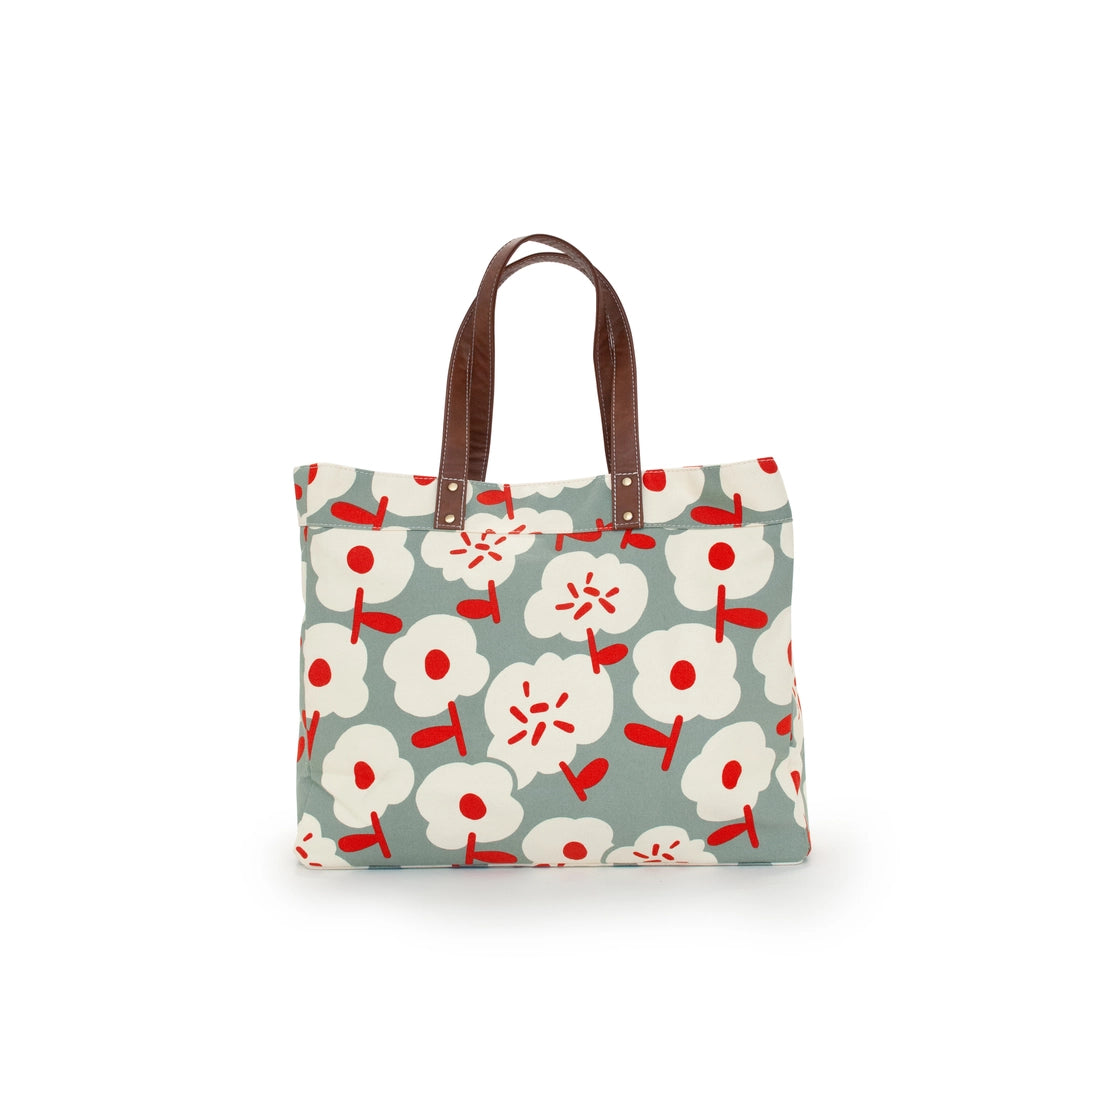 Sierra - Carryall Tote from MAIKA